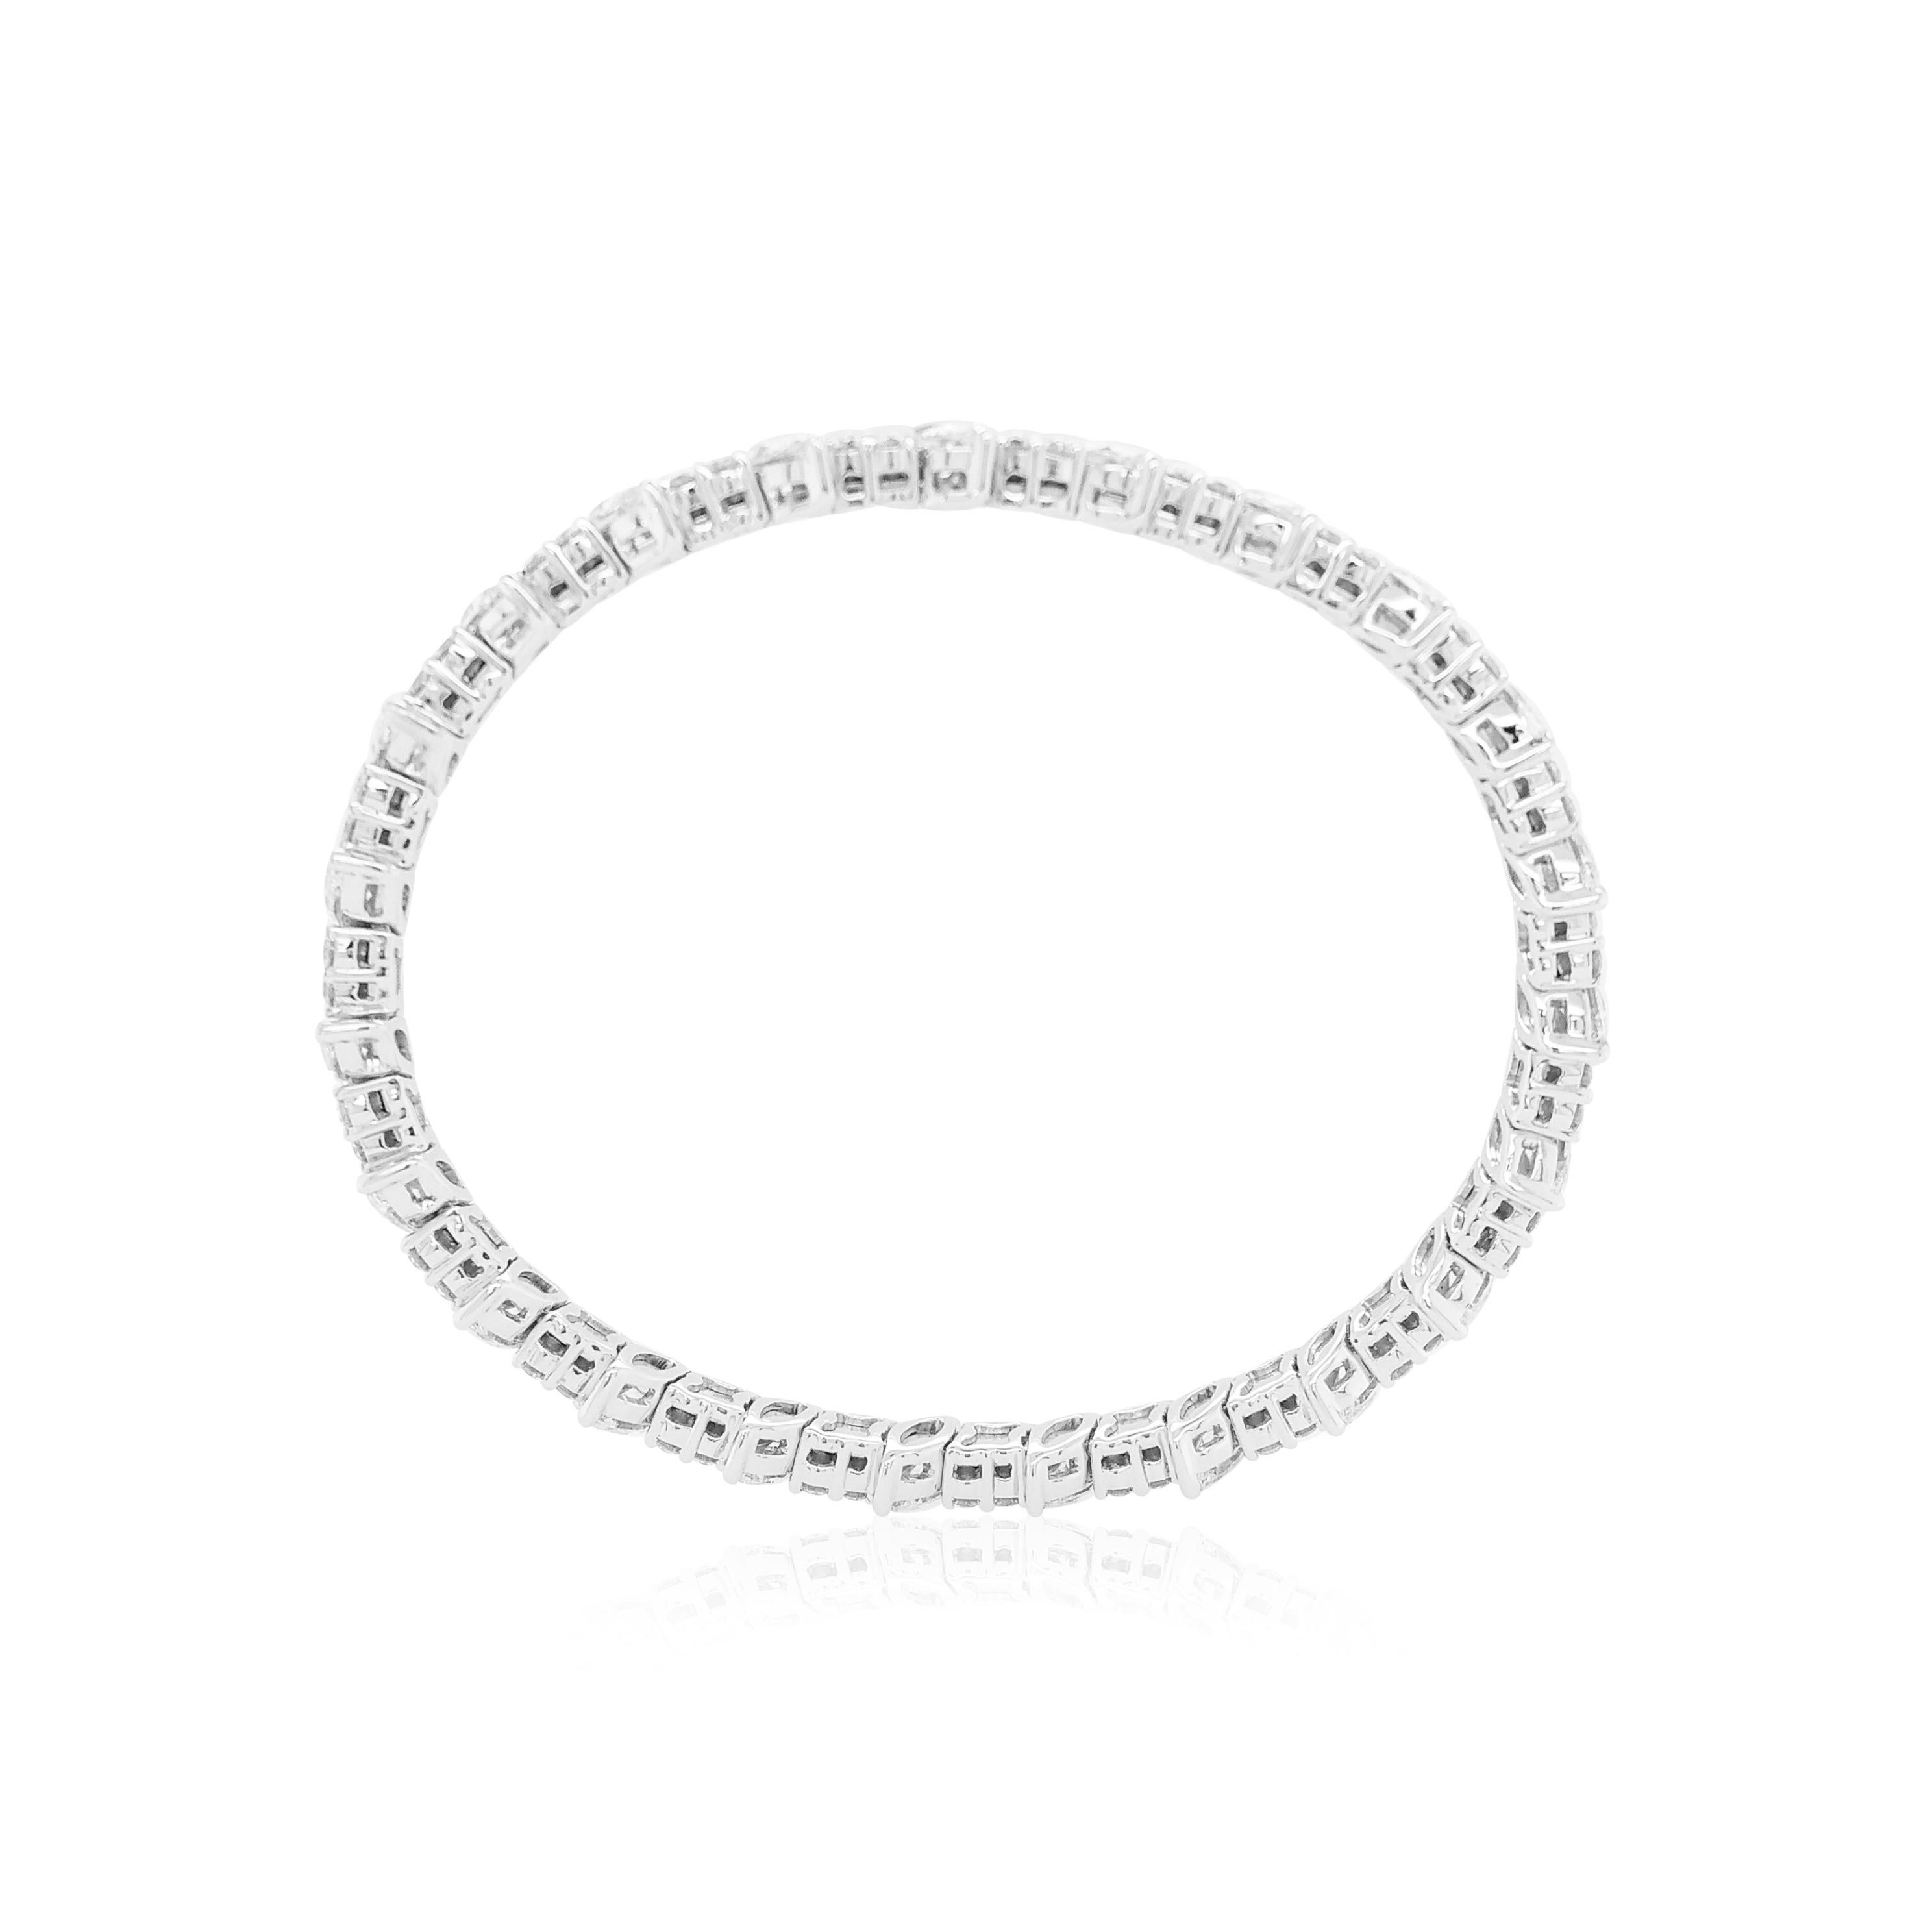 This playful bangle features sumptuous Marquise-shape and Round-shape White Diamonds setting among 18K white gold. With a hidden clasp, easy to wear, day or night, this unique bangle is sure to set you apart from the crowd. This contemporary bangle